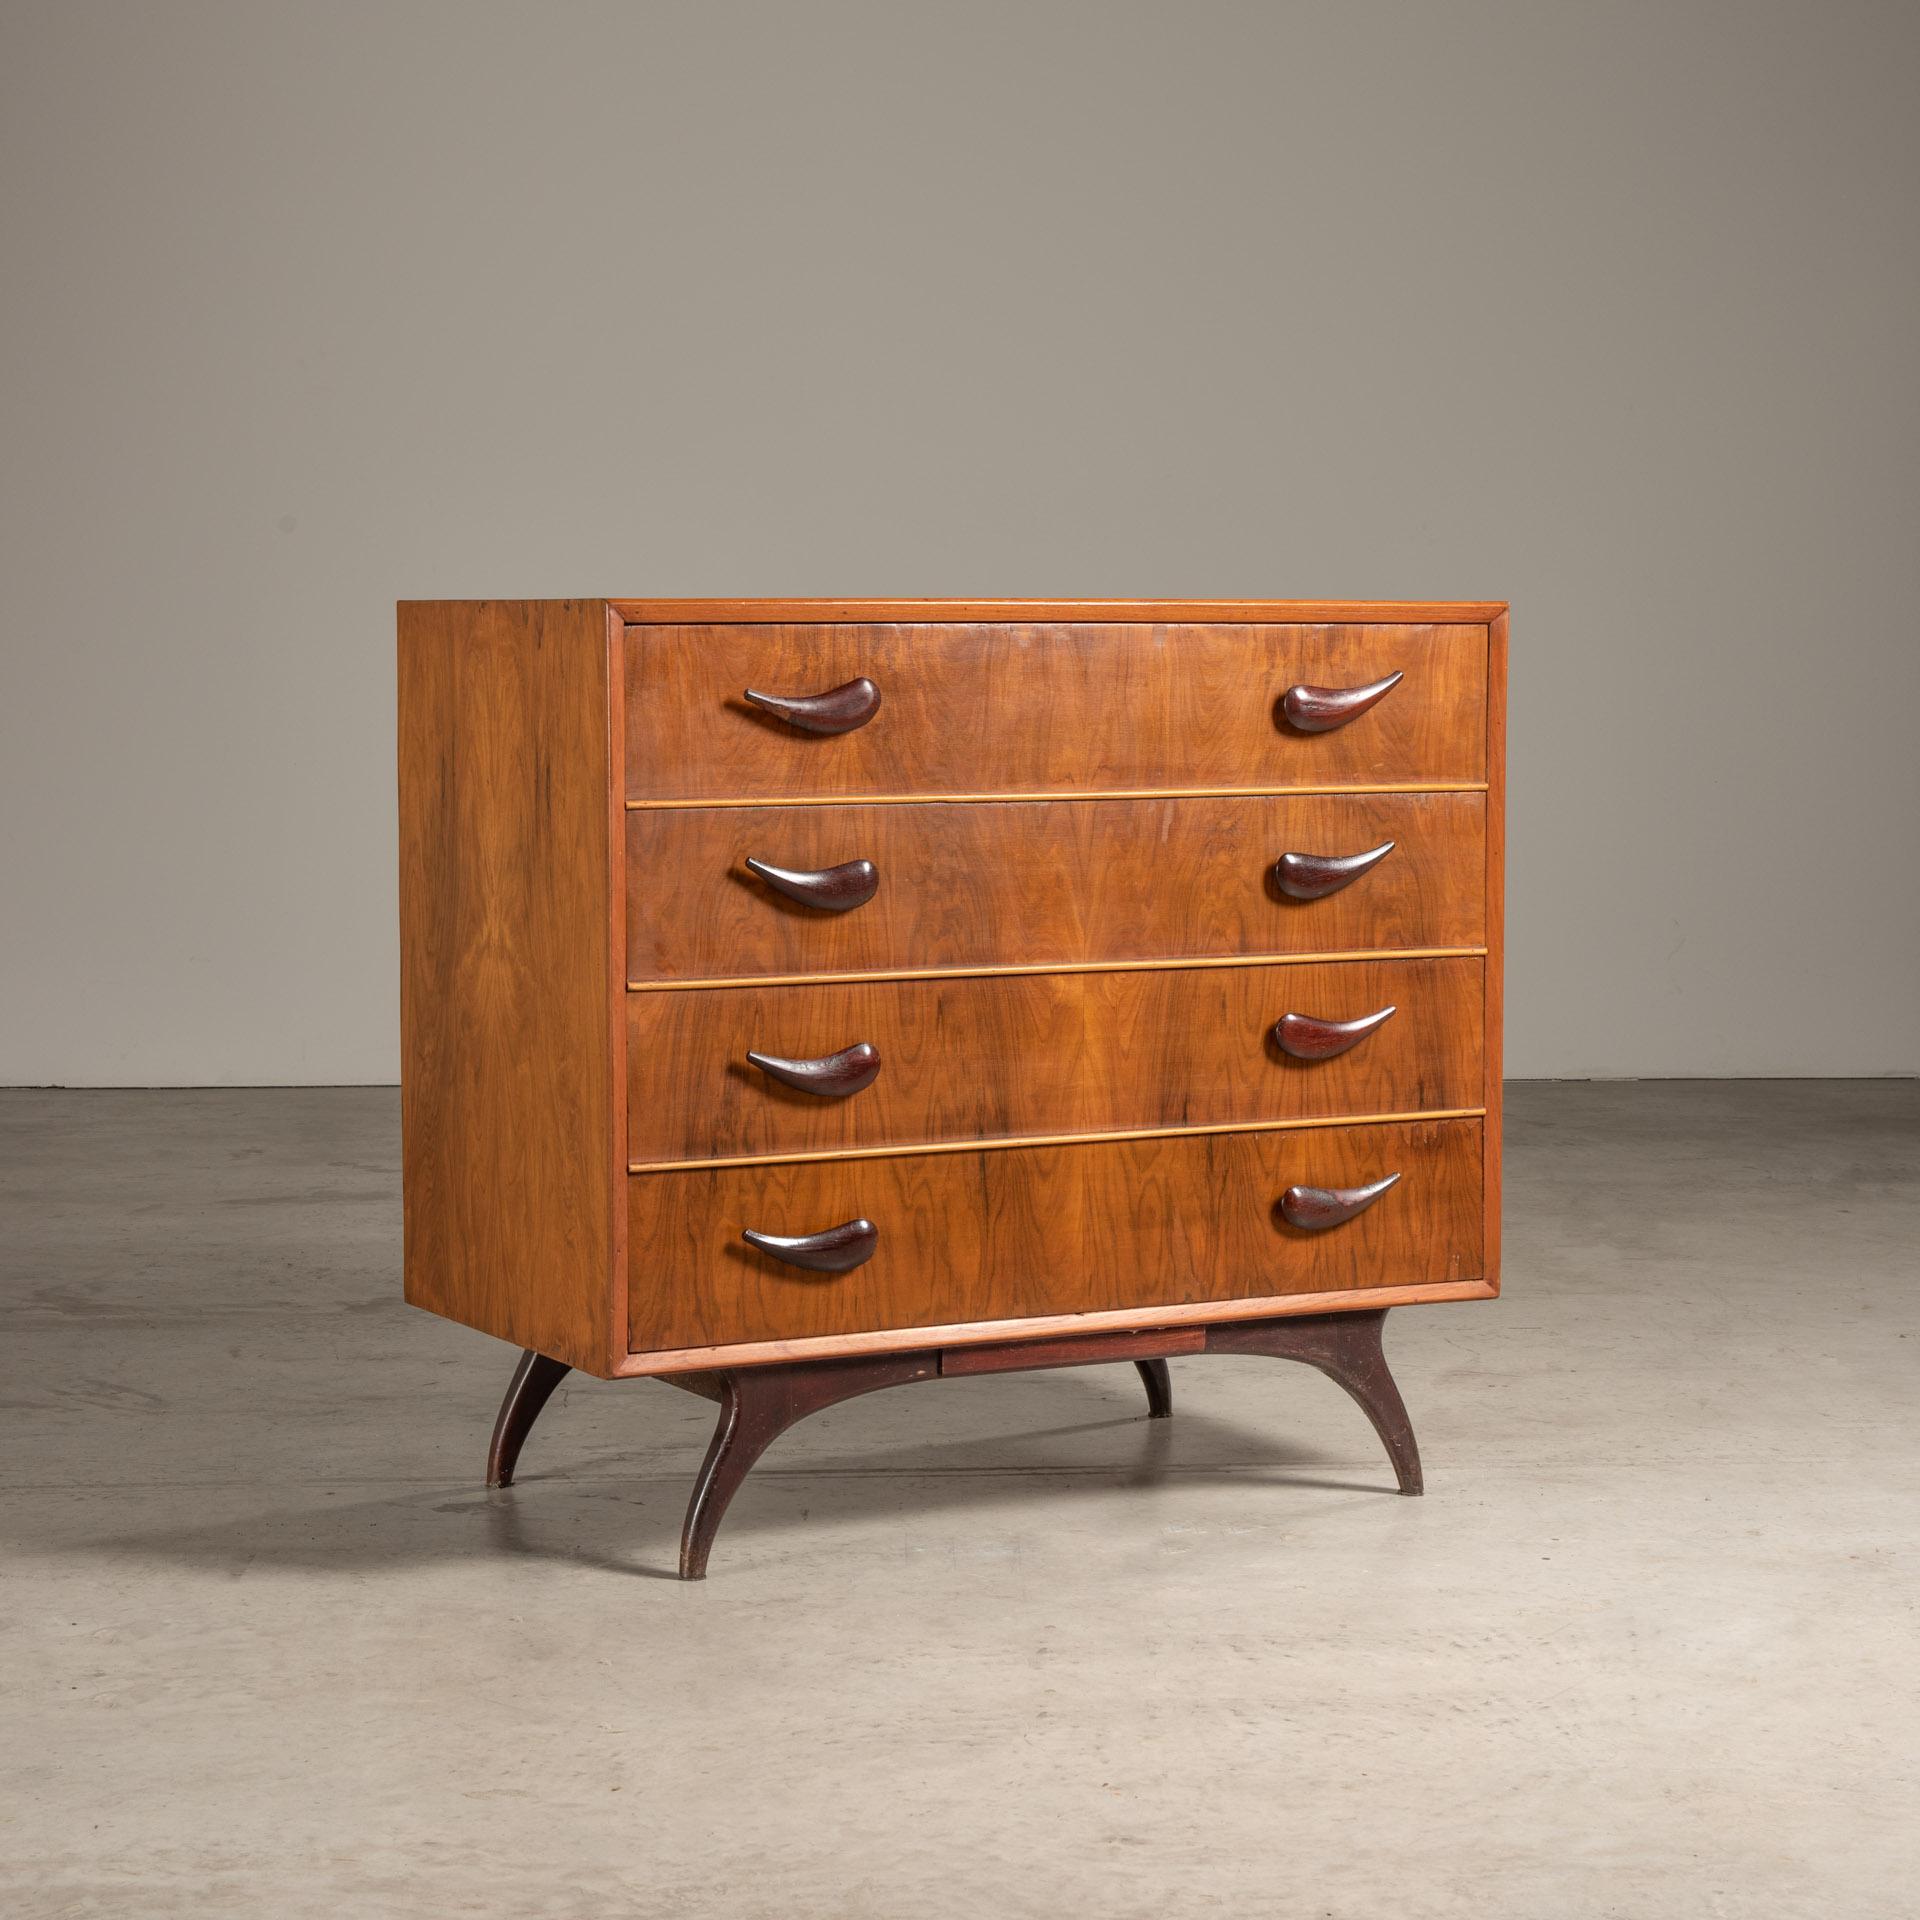 This chest of drawers is a classic example of mid-20th century Brazilian furniture, manufactured by Móveis Cimo. This piece embodies the aesthetic of the period with its clean lines, use of warm wood, and functional design. 

This chest of drawers